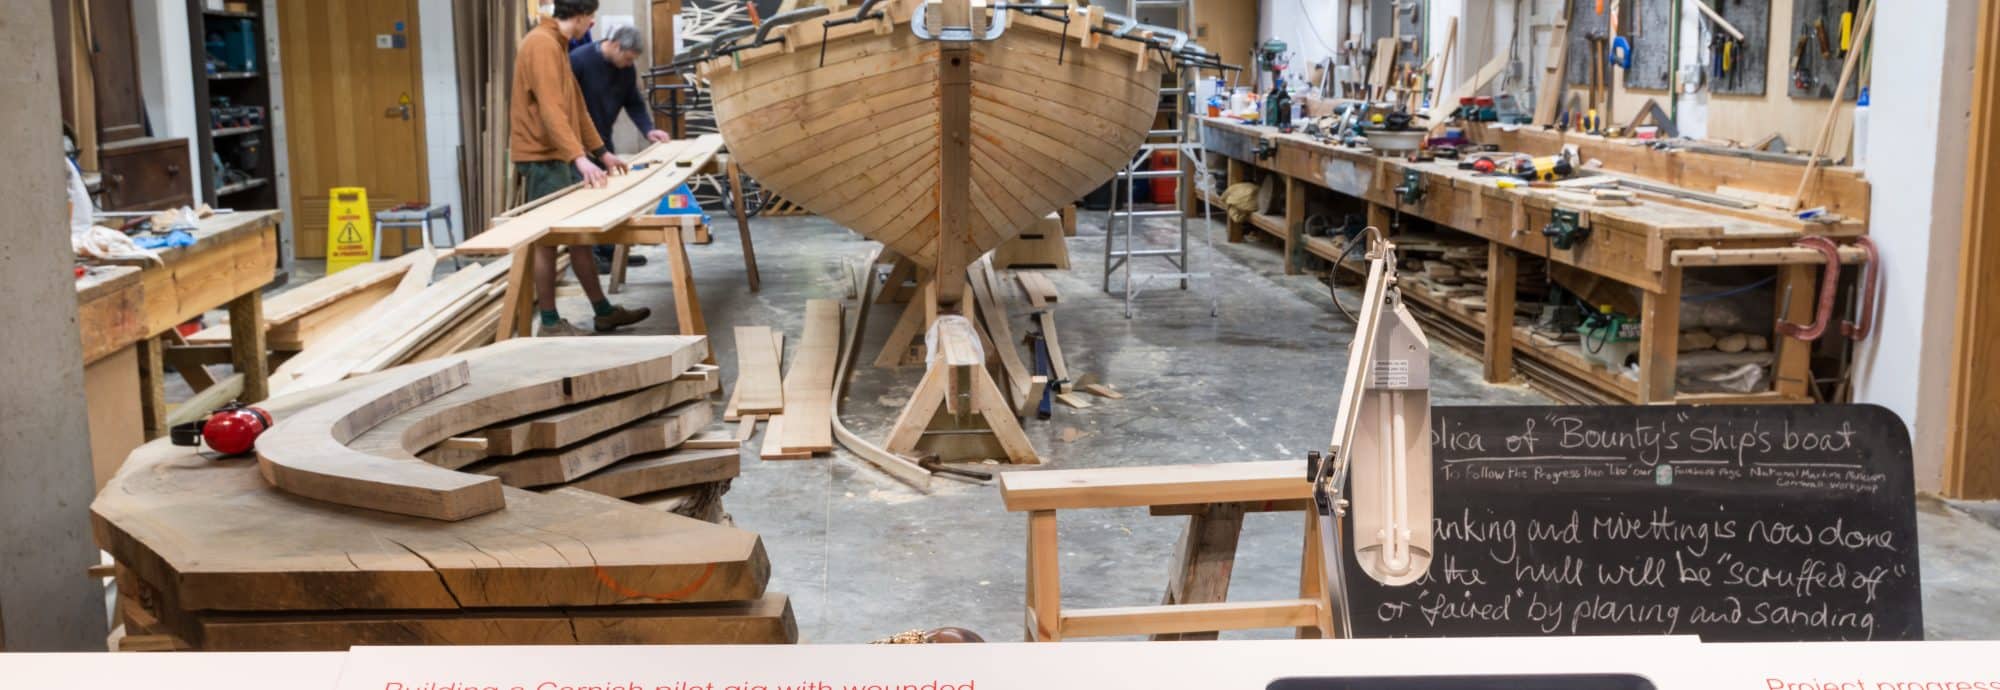 A photo of the wooden frame of a boat being worked on in the Museum's workshop.